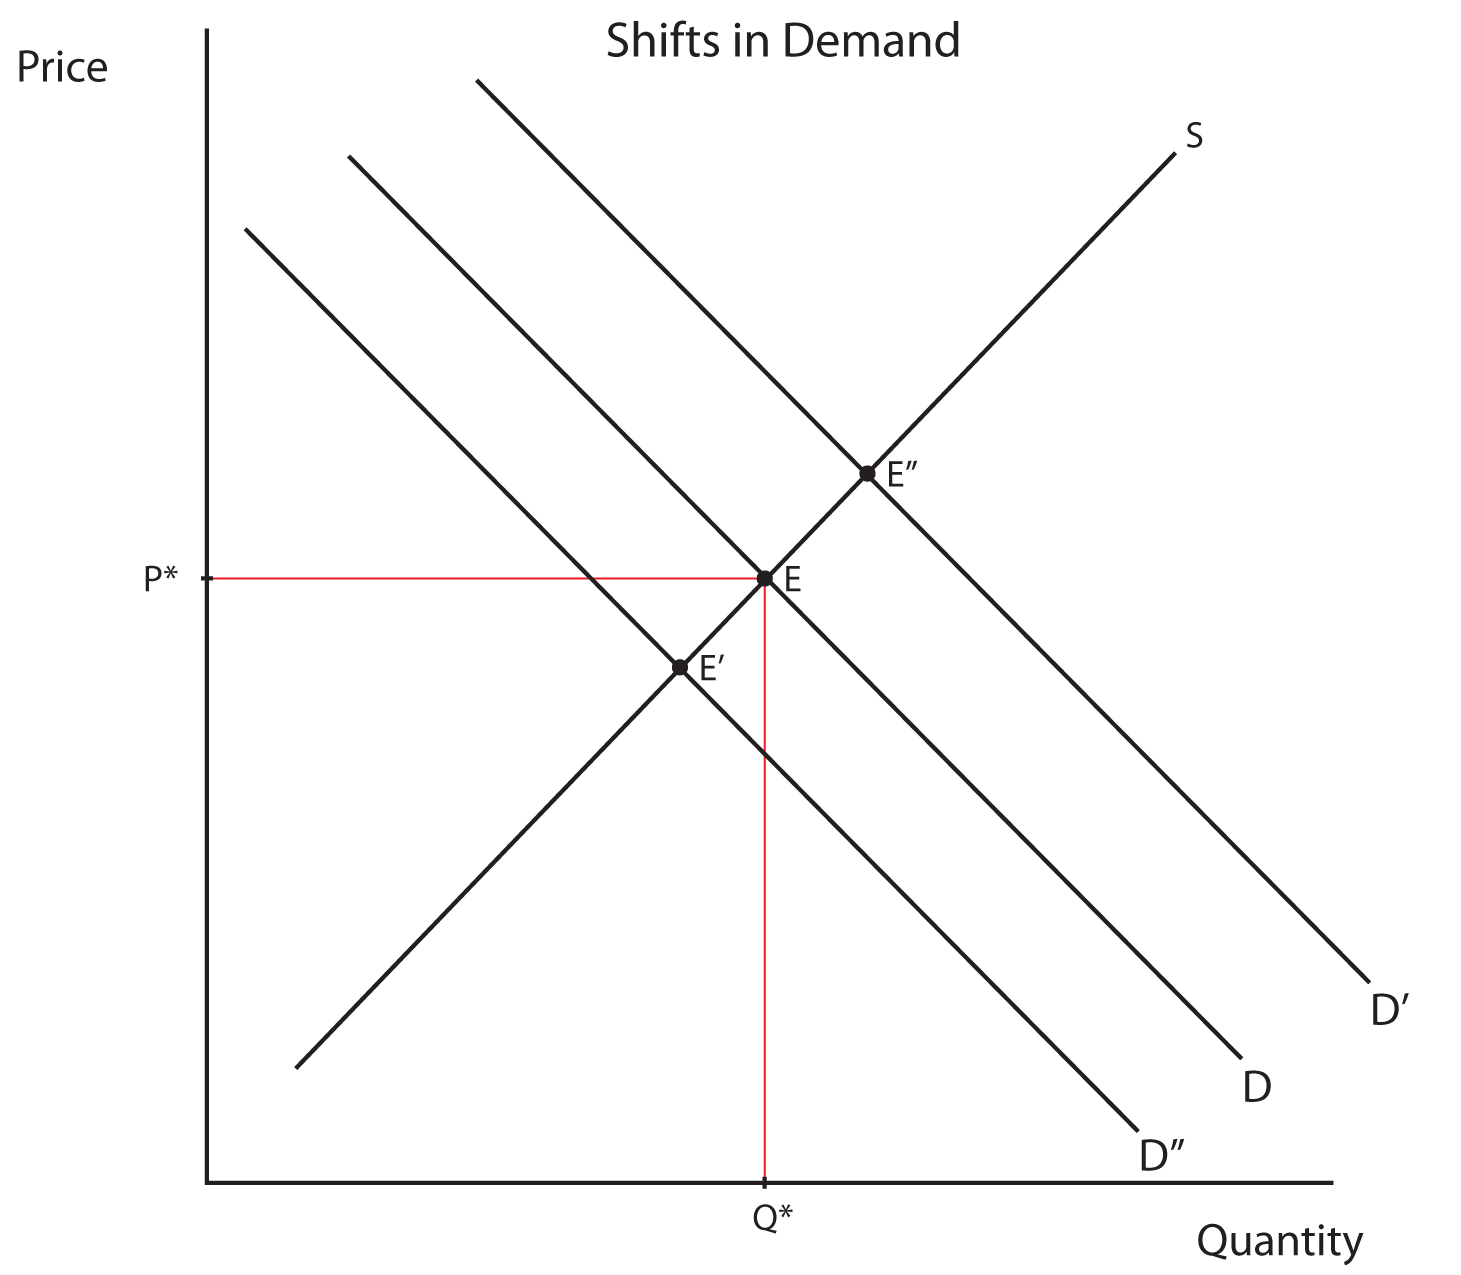 Description: Description: Image 1.13: Shifts in Demand. This image shows a graph with Price on the Y axis and Quantity on the X axis.
Two 45 degree angle lines cross at a point labeled E. Point E is connected by a horizontal line to a point labeled P* on the Y axis and by a vertical line to a point labeled Q* on the X axis.  Line D slopes downward from the Y axis to the X axis, and line S slopes upward away from the origin.  A parallel line to the right of line D is labeled D Prime.  The point where D Prime intersects line S is labeled E Prime Prime. Another parallel line to the left of line D is labeled D Prime Prime.  The point where D Prime Prime intersects line S is labeled E Prime.